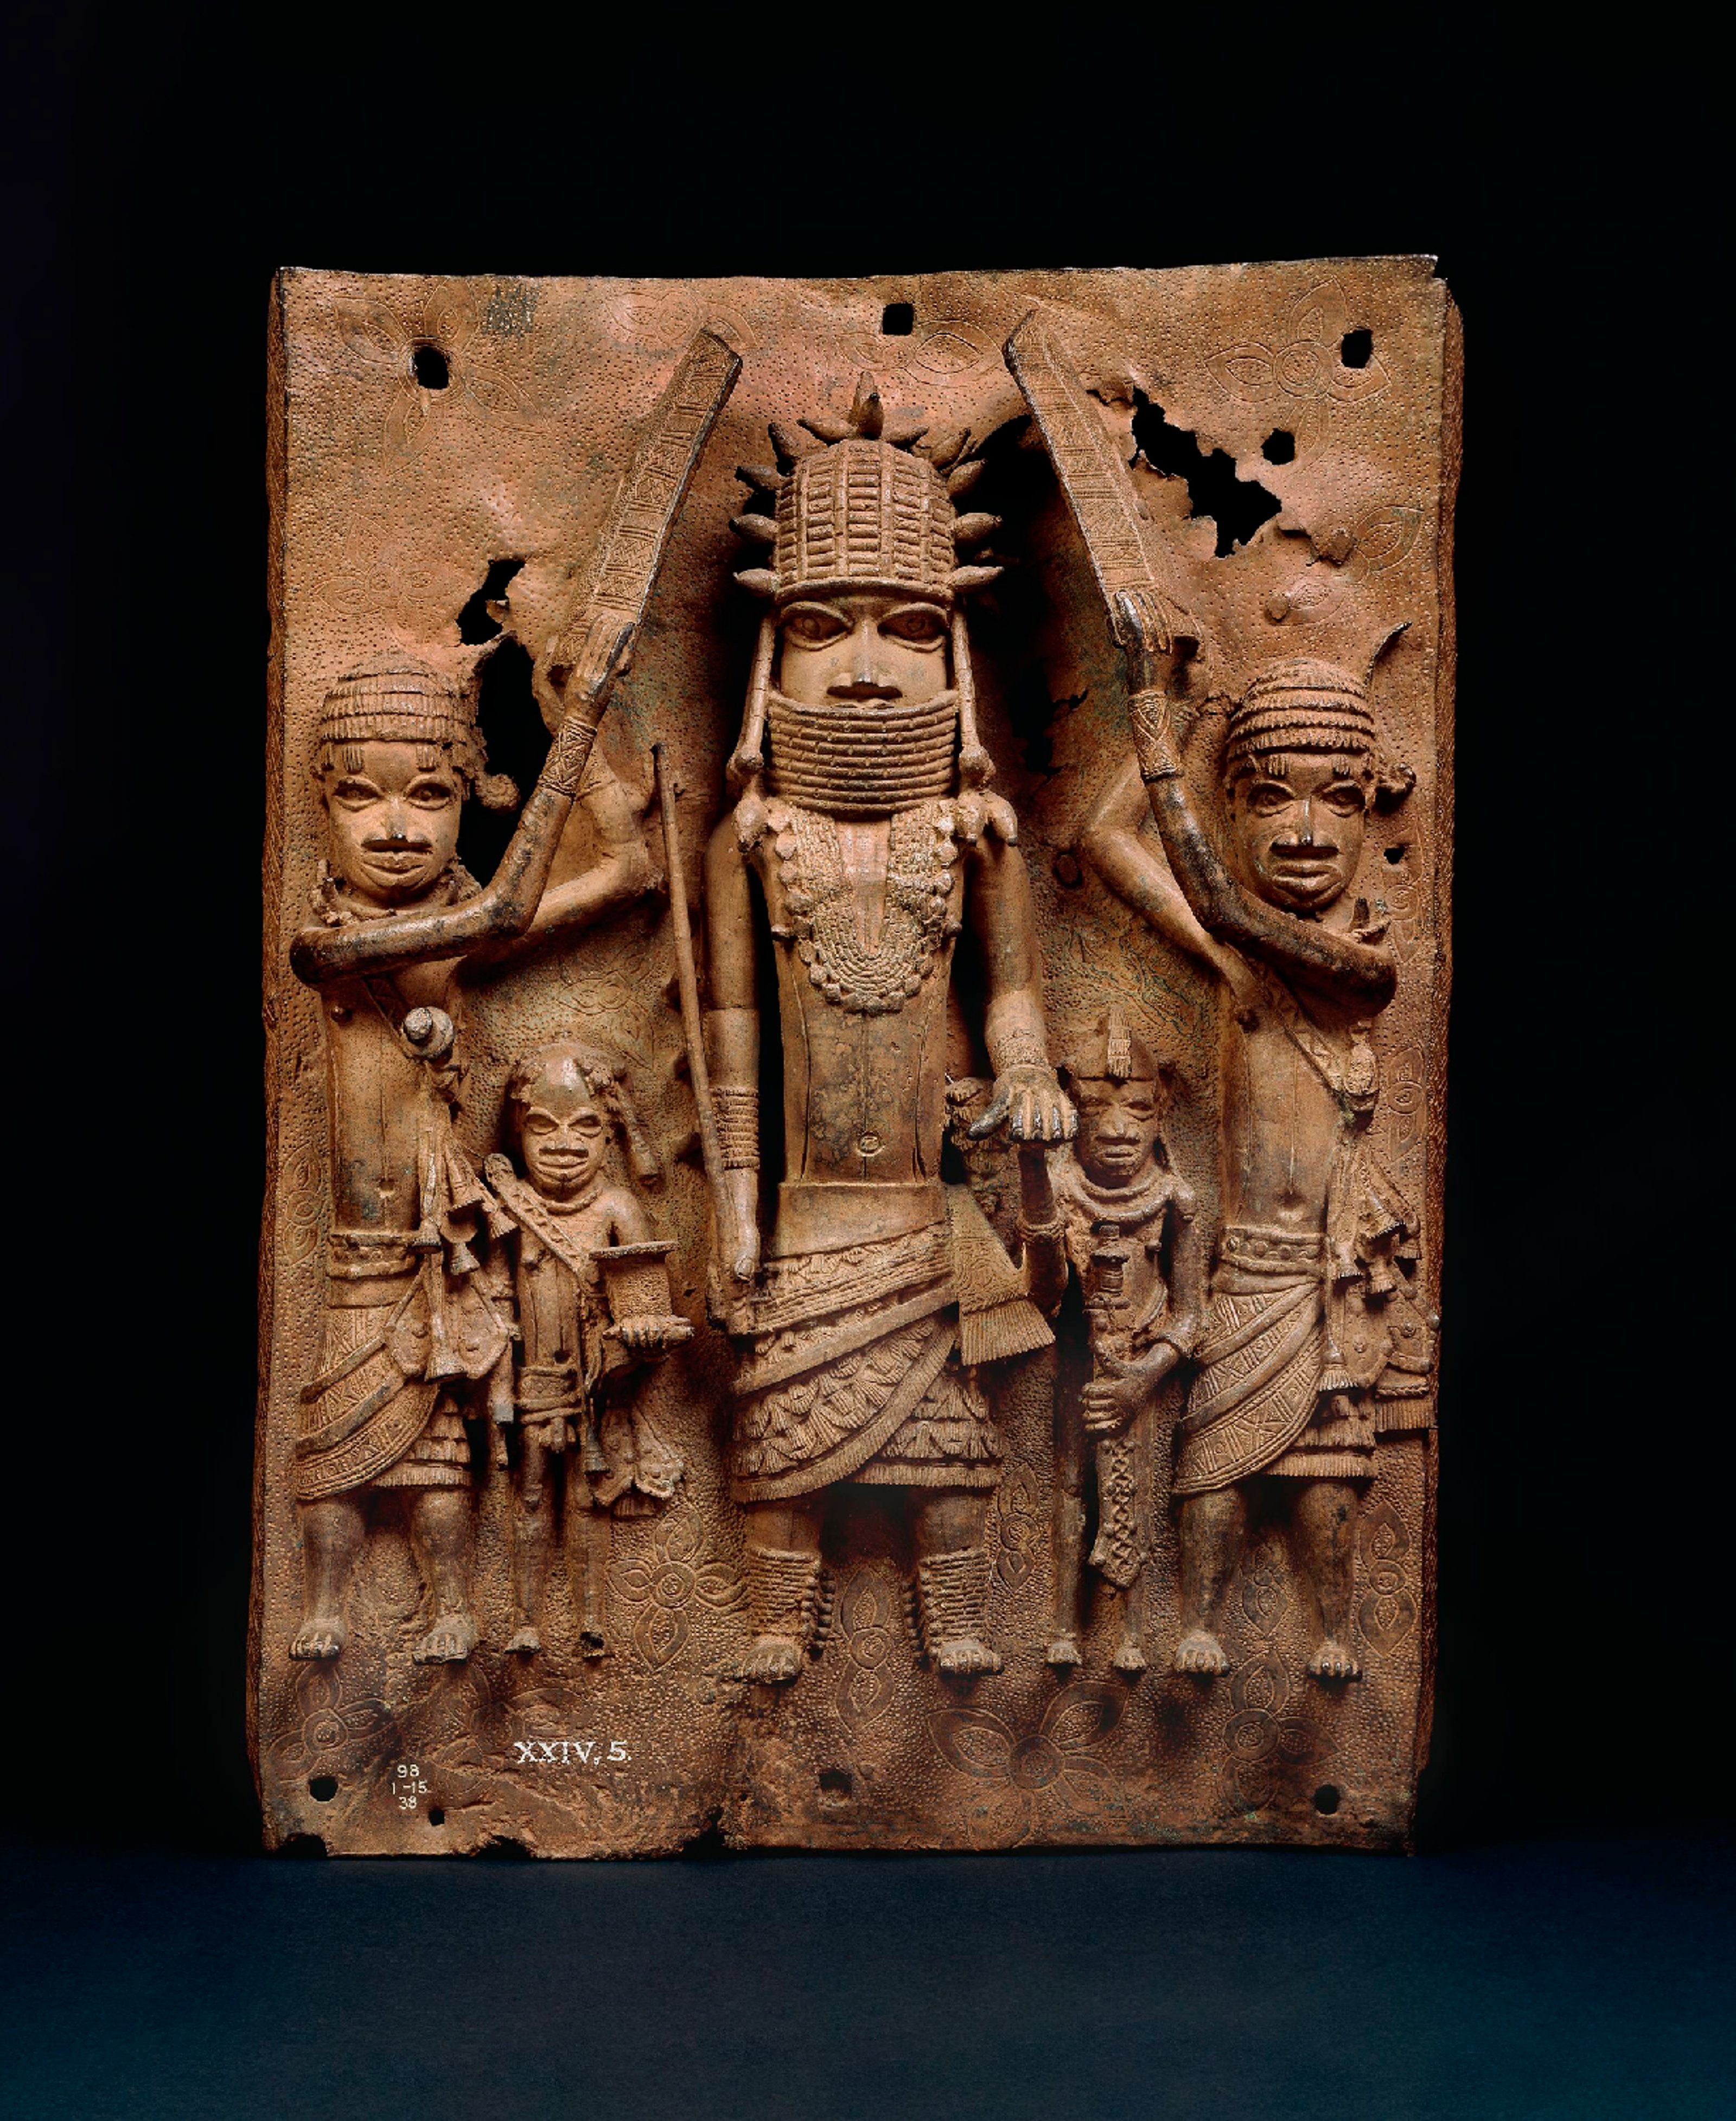 In front of a black background, 5 human figures are engraved on the Benin Plaques made of bronze.